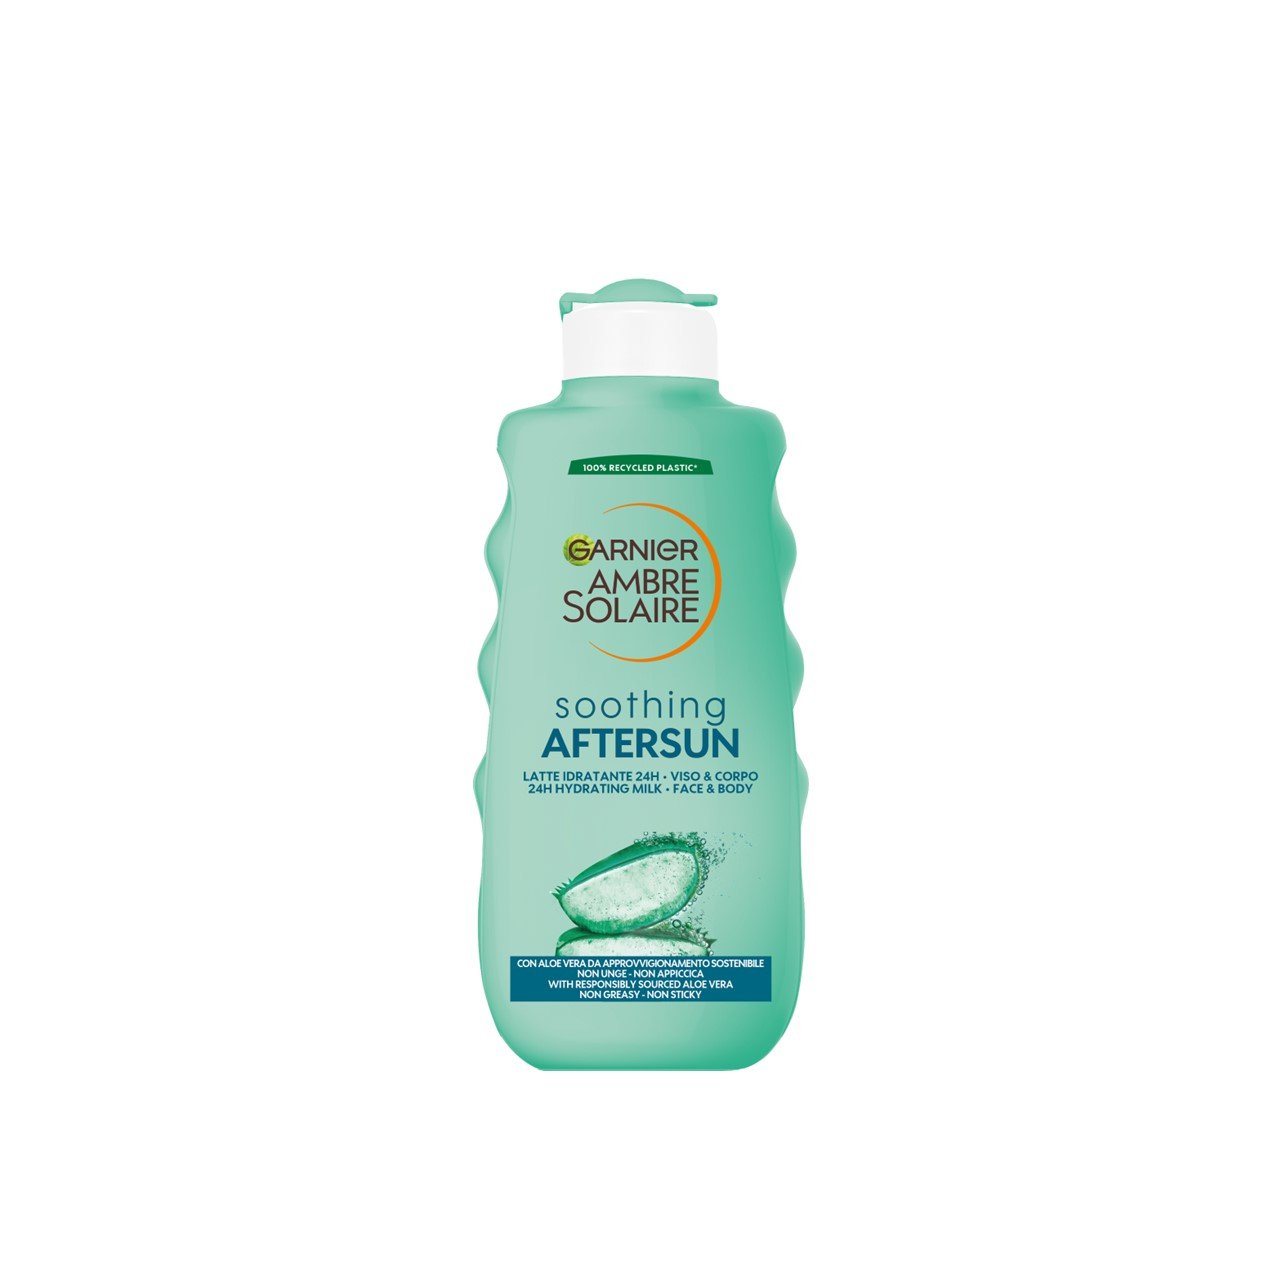 Garnier Ambre Solaire Soothing After Sun 24h Hydrating Milk 200ml (6.76fl oz)